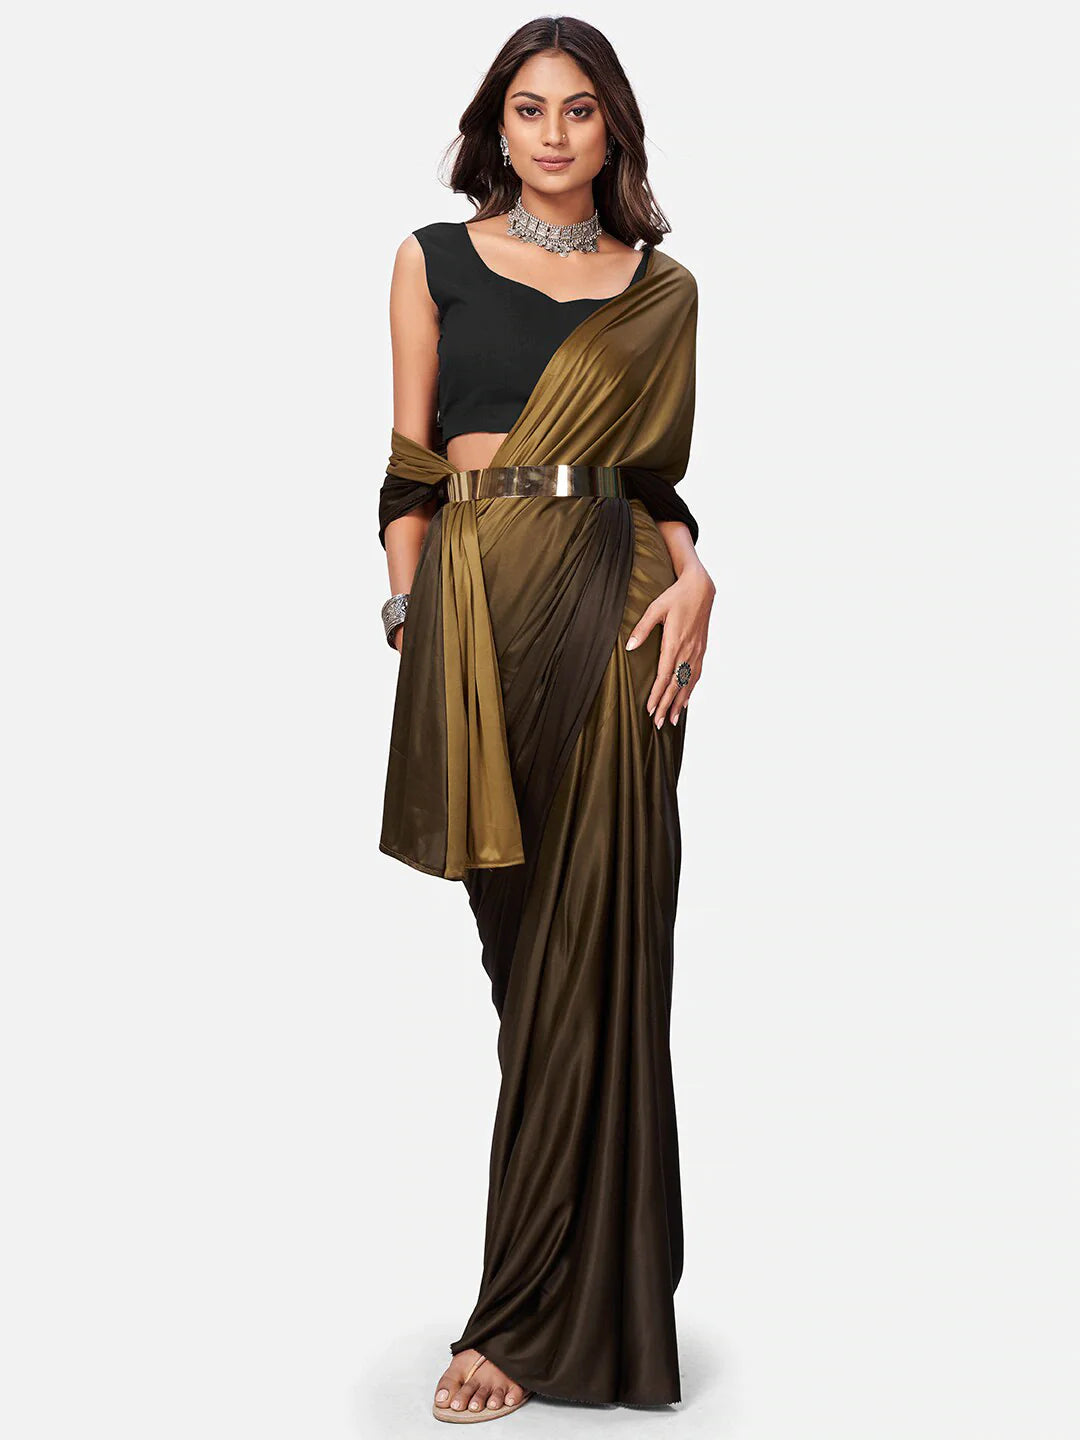 Gold Color Ready to wear Lycra saree with Metal Belt - Colorful Saree